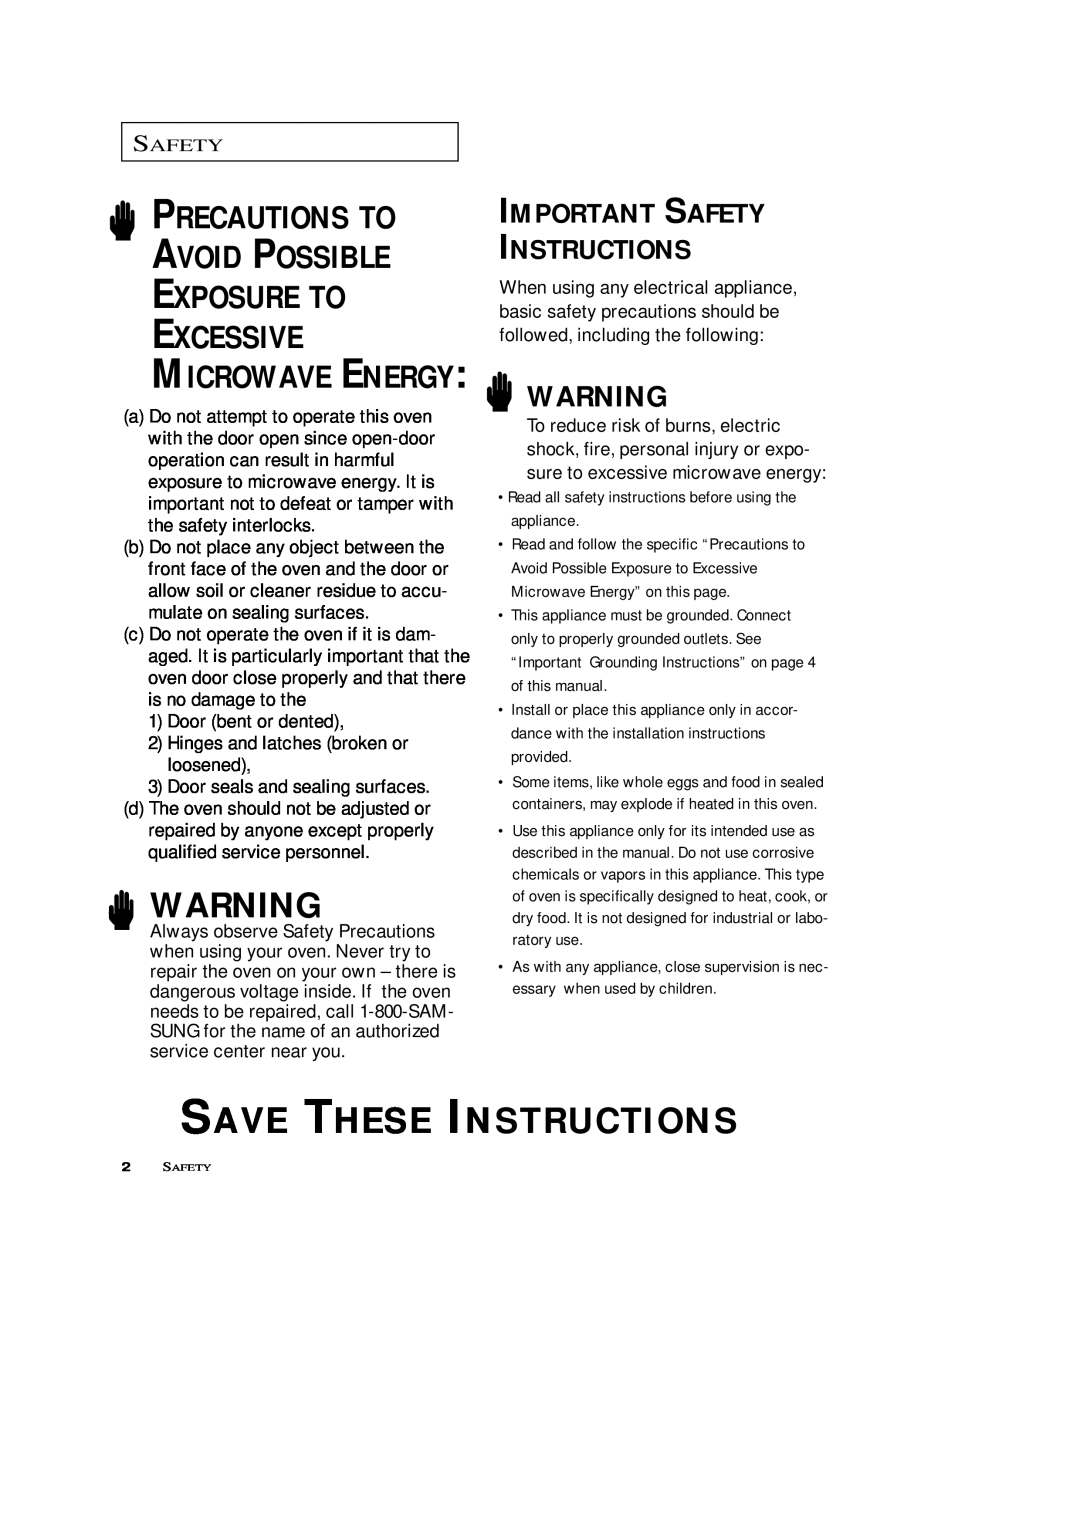 Samsung SRH1230ZG Save These Instructions, Precautions To Avoid Possible Exposure To Excessive, Microwave Energy 